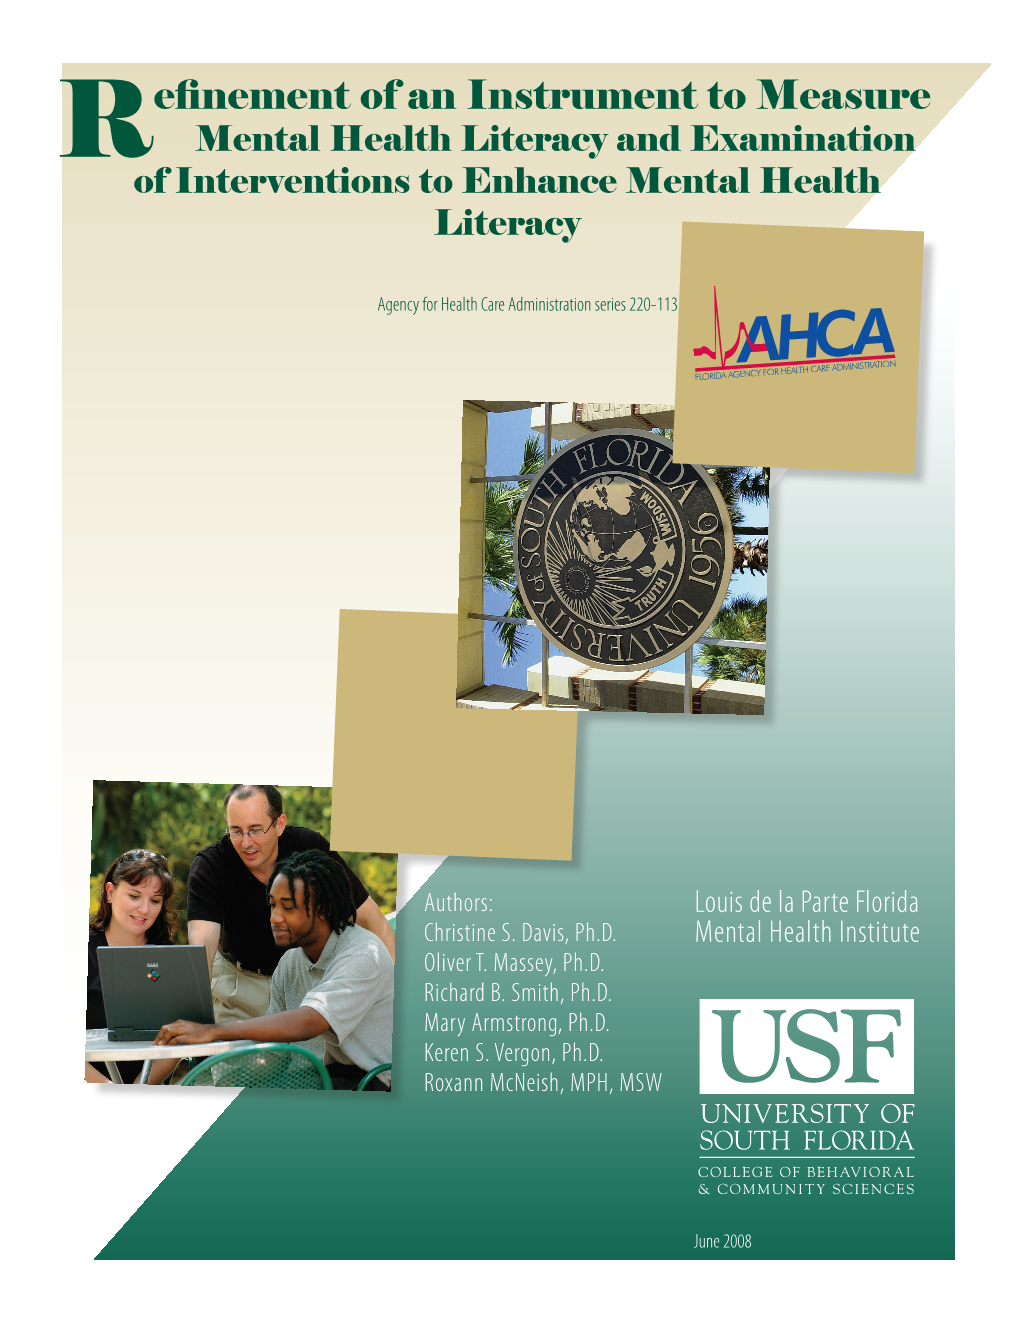 Refinement of an Instrument to Measure Mental Health Literacy and Examination of Interventions to Enhance Mental Health Literacy